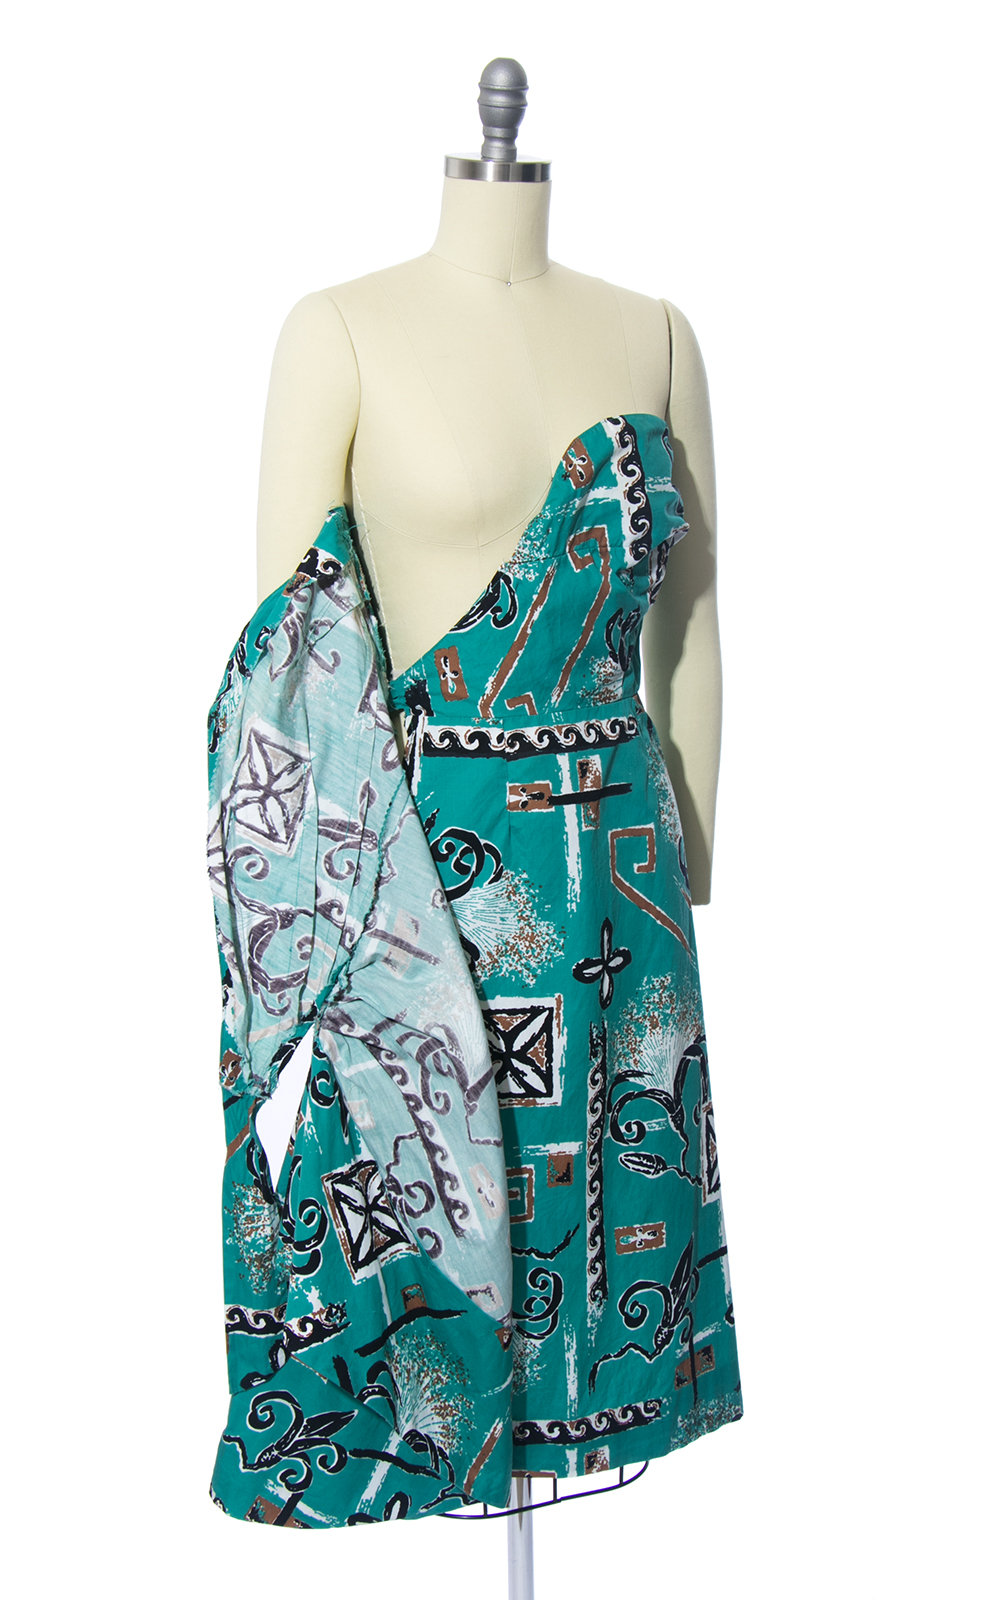 Vintage 1950s Sarong Dress | 50s ALFRED SHAHEEN Hawaiian Novelty Print Floral Cotton Teal Strapless Wiggle Wrap Tiki Sundress (small)